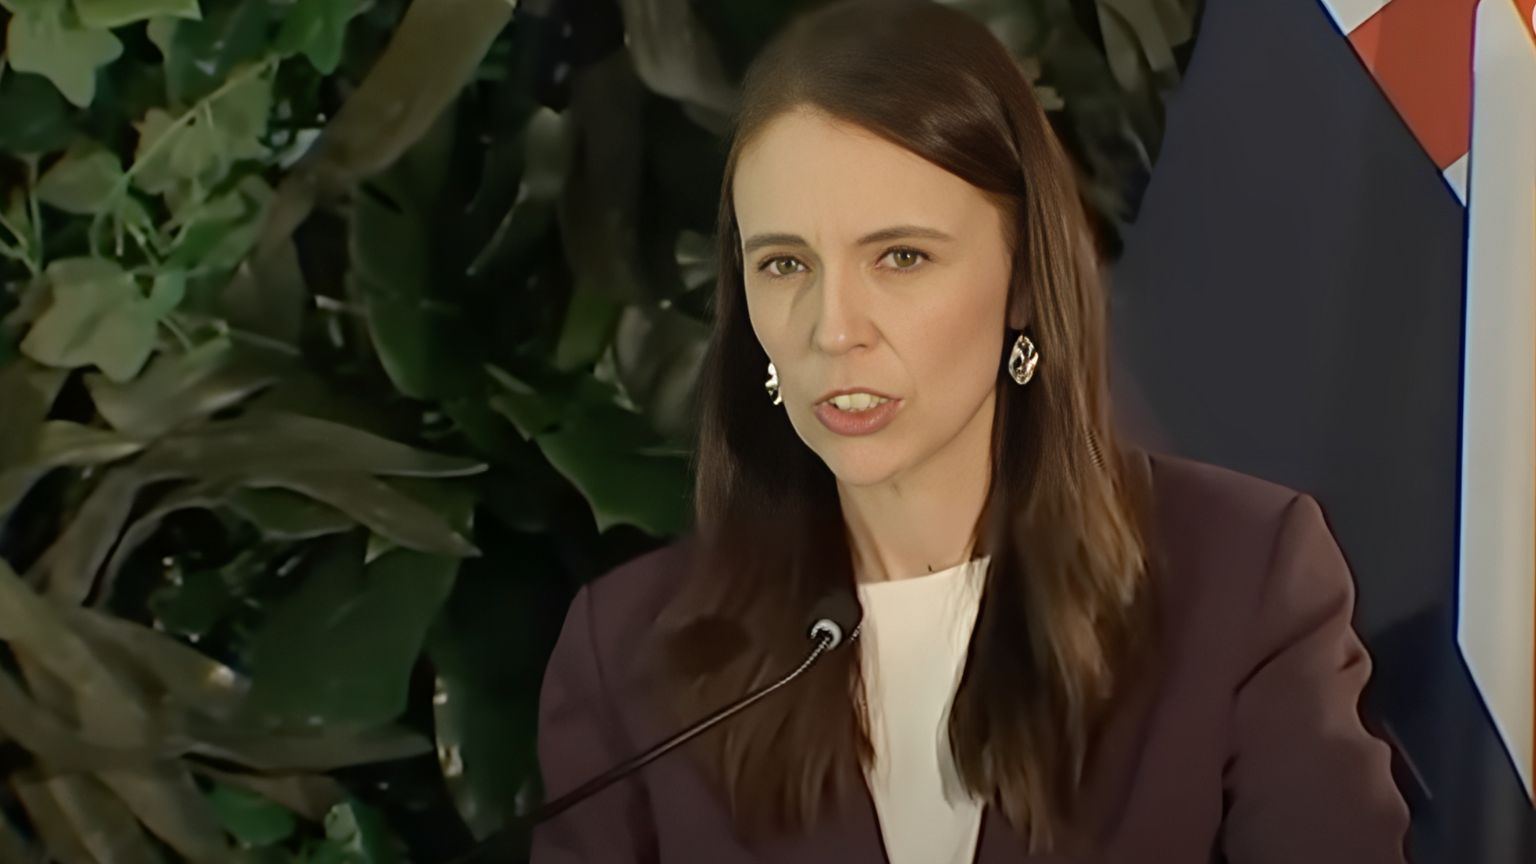 New Zealand wants to force Big Tech to hand over cash to mainstream media